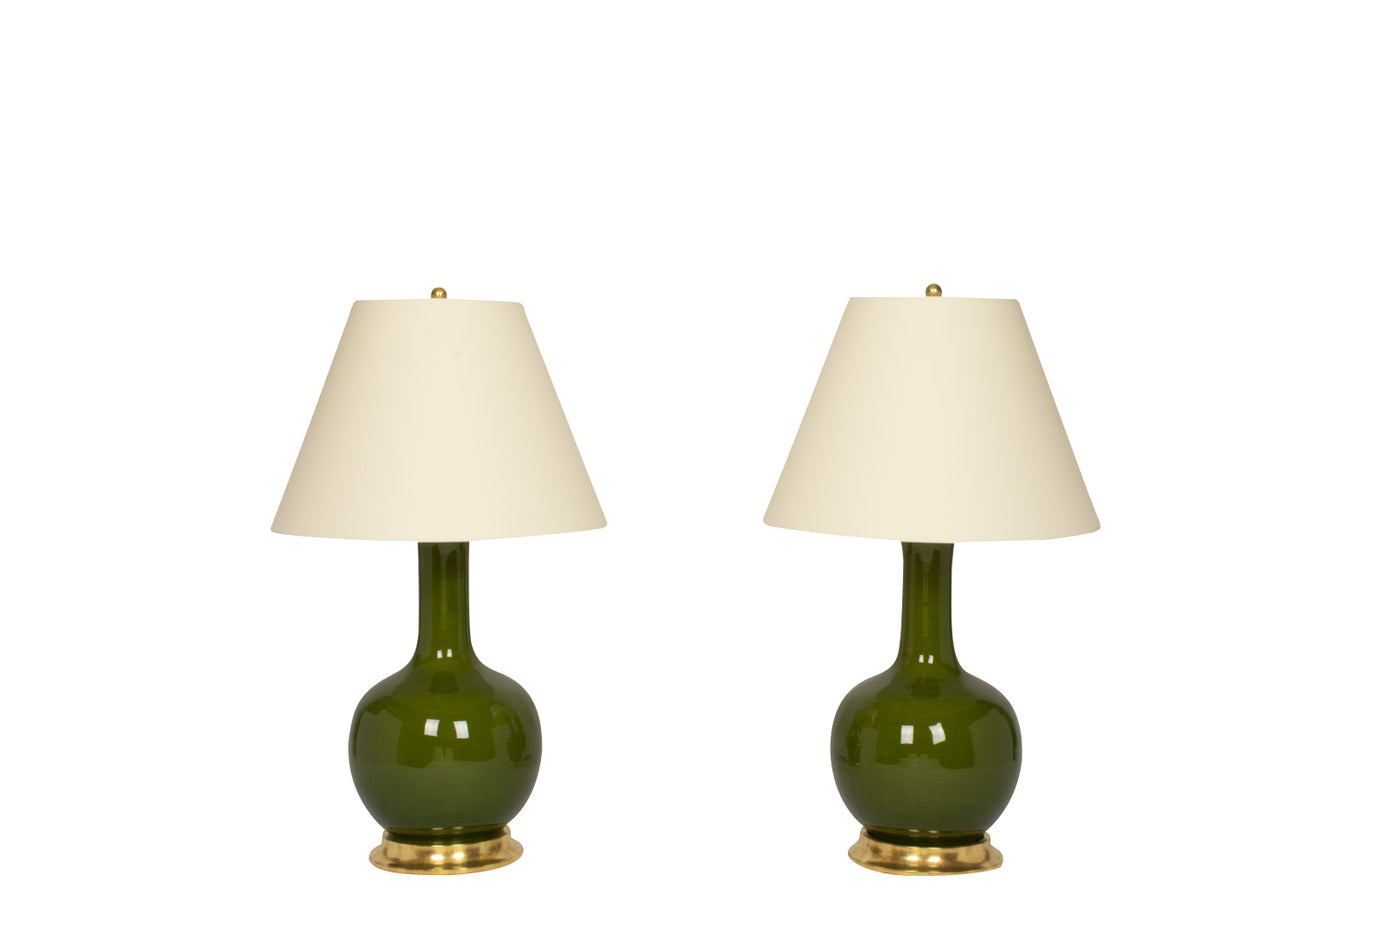 A Pair of Large Single Gourd Lamps in Spruce by Christopher Spitzmiller  | Newport Lamp And Shade | Located in Newport, RI